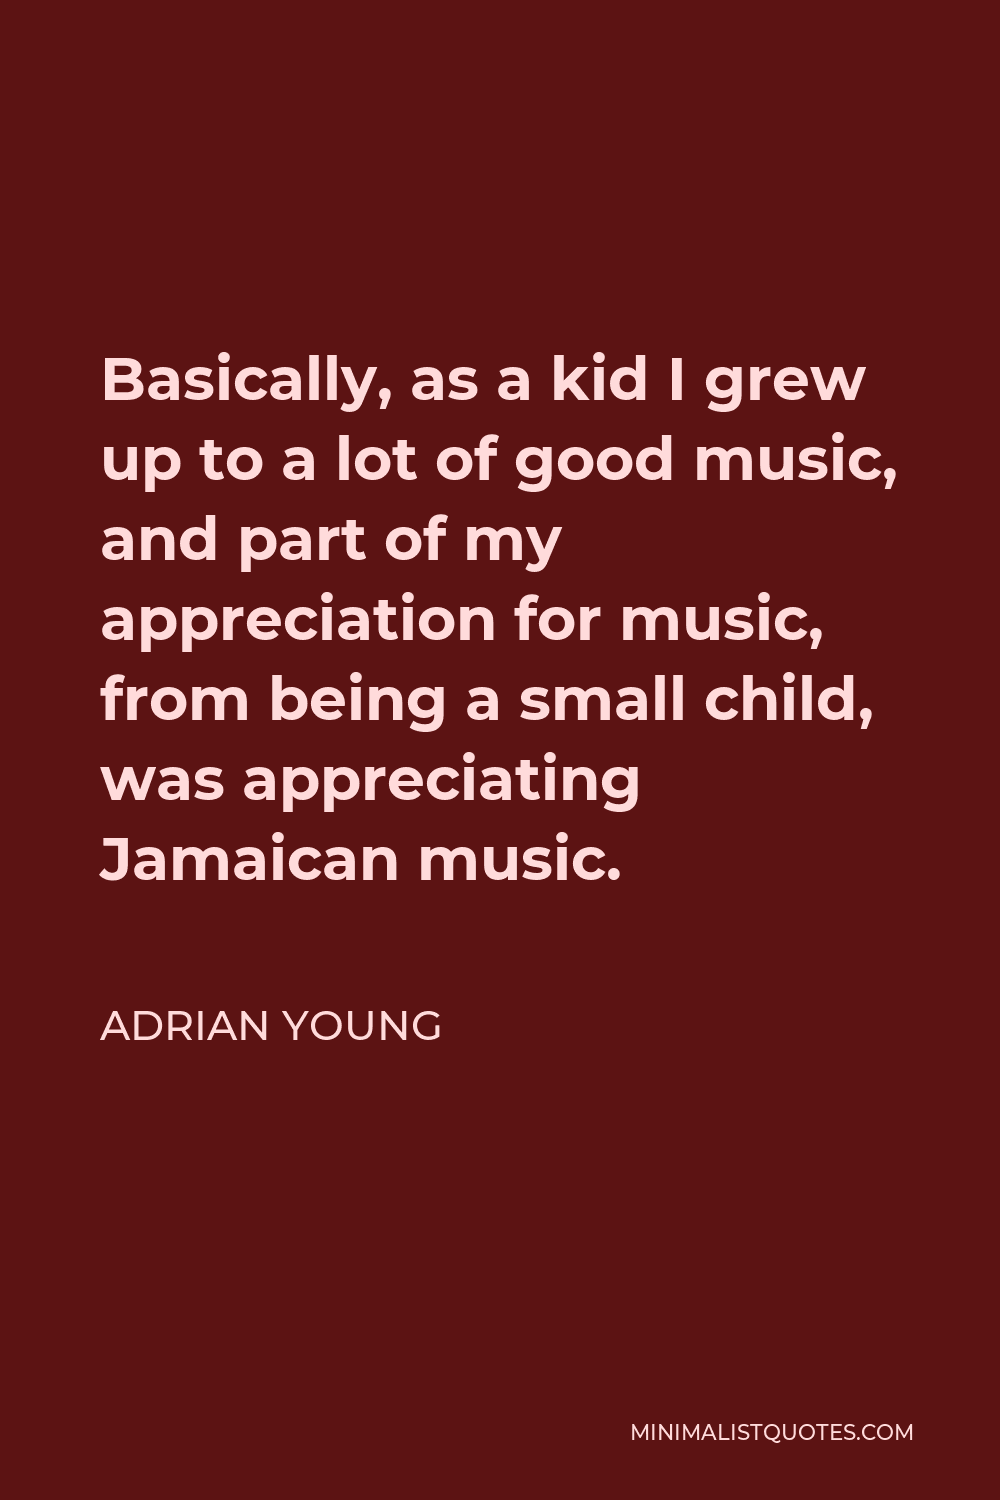 Adrian Young Quote - Basically, as a kid I grew up to a lot of good music, and part of my appreciation for music, from being a small child, was appreciating Jamaican music.